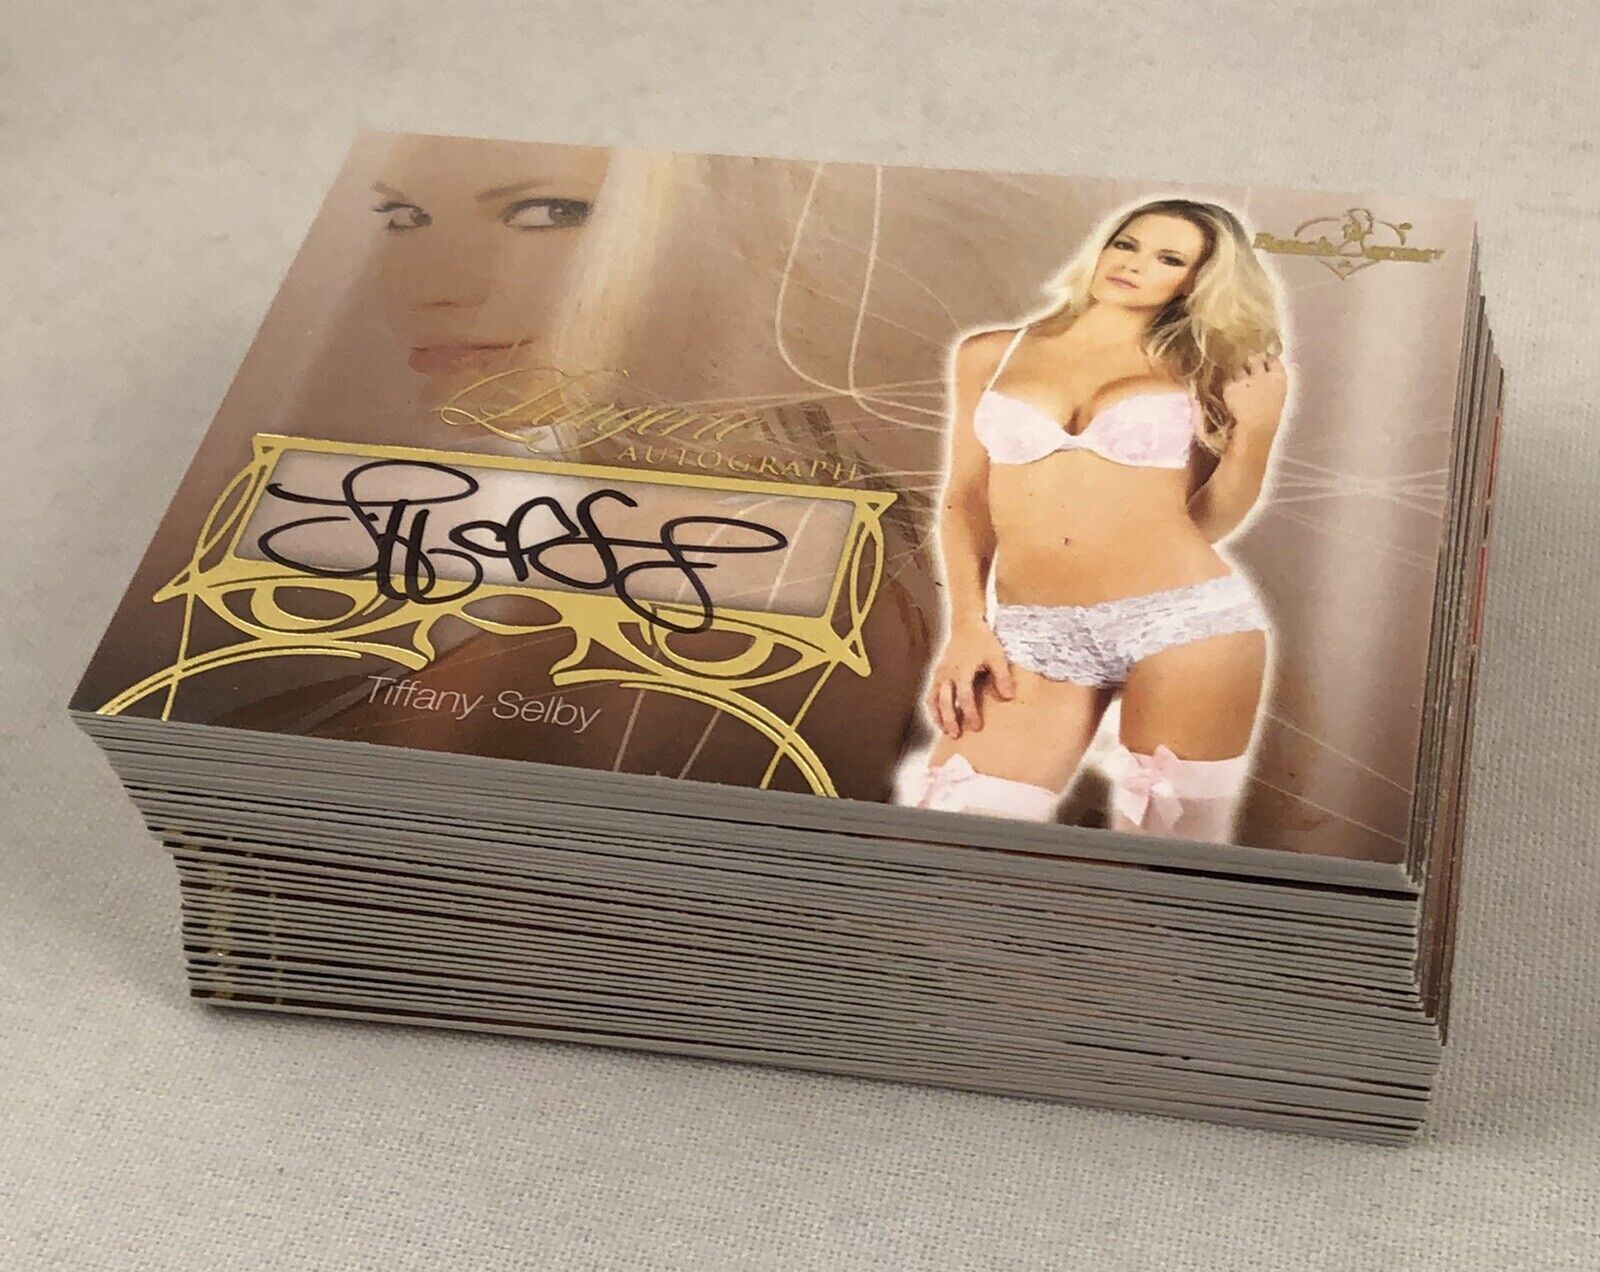 2013 Benchwarmer Hobby Complete Set of 45 Cards Autograph Lingerie Bench Warmer